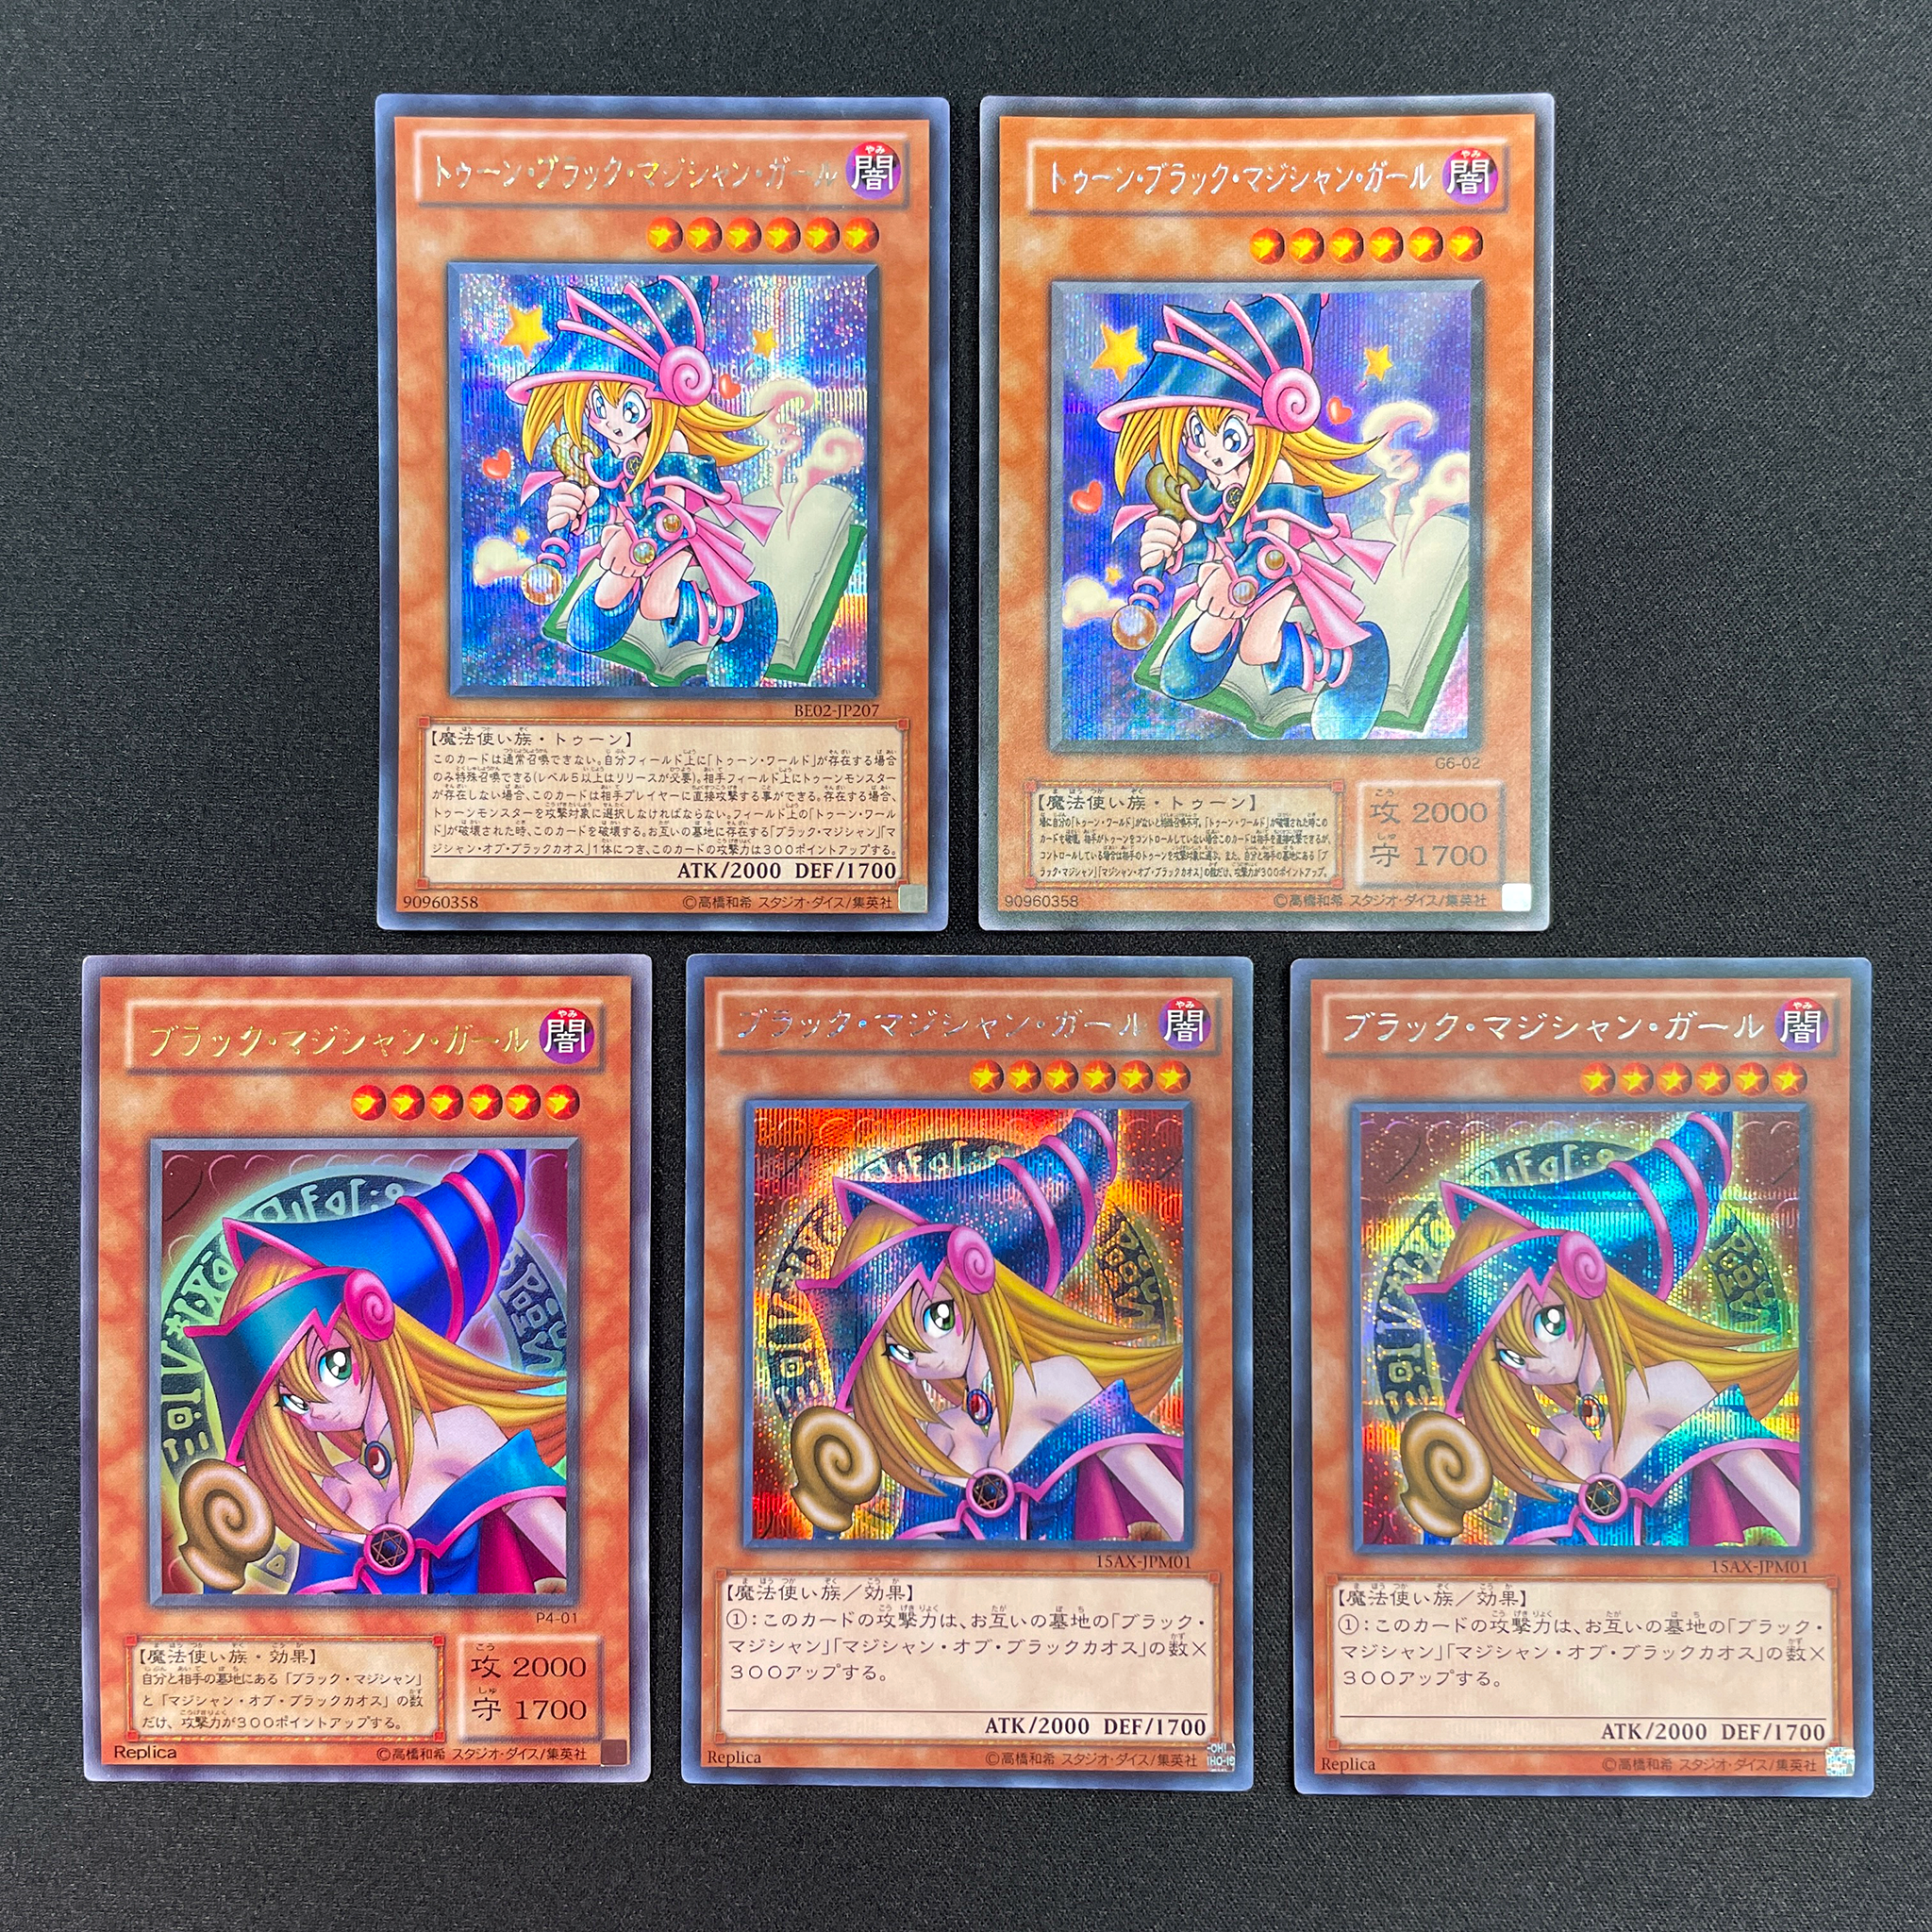 Yu-Gi-Oh! Official Card Game Black Magician Girl 5 cards set